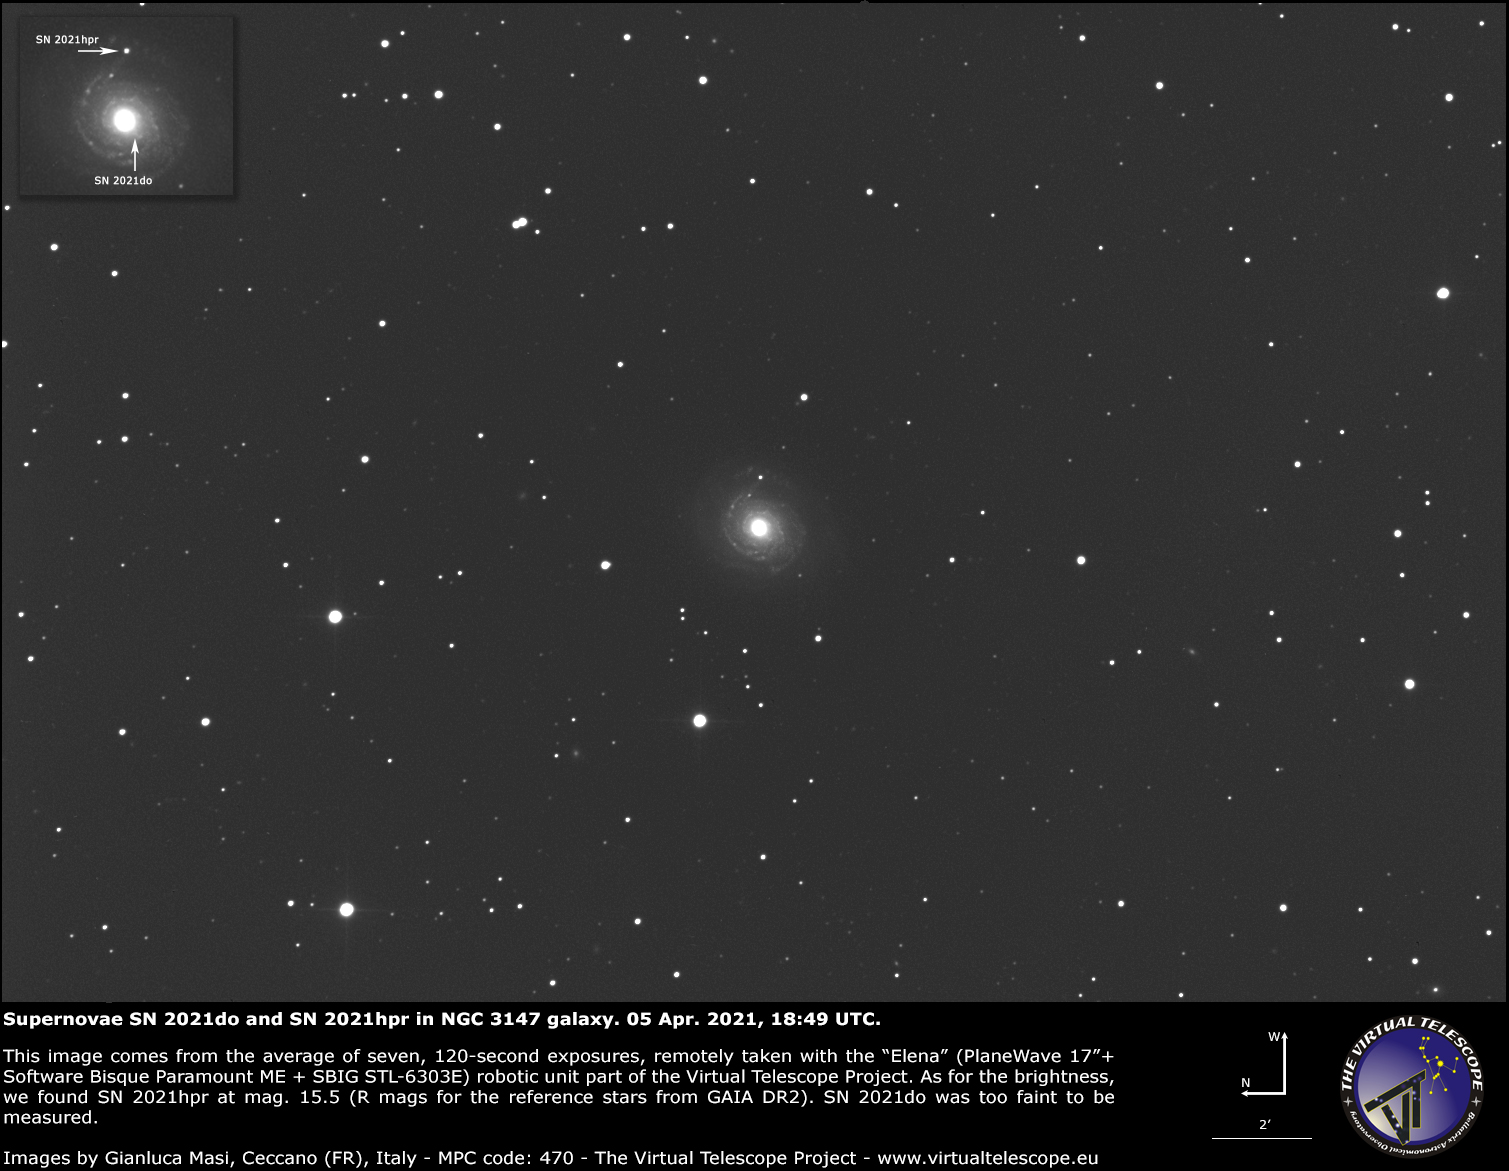 Supernovae SN 2021hpr and SN 2021do inNGC 3147 galaxy: 5 Apr. 2021.